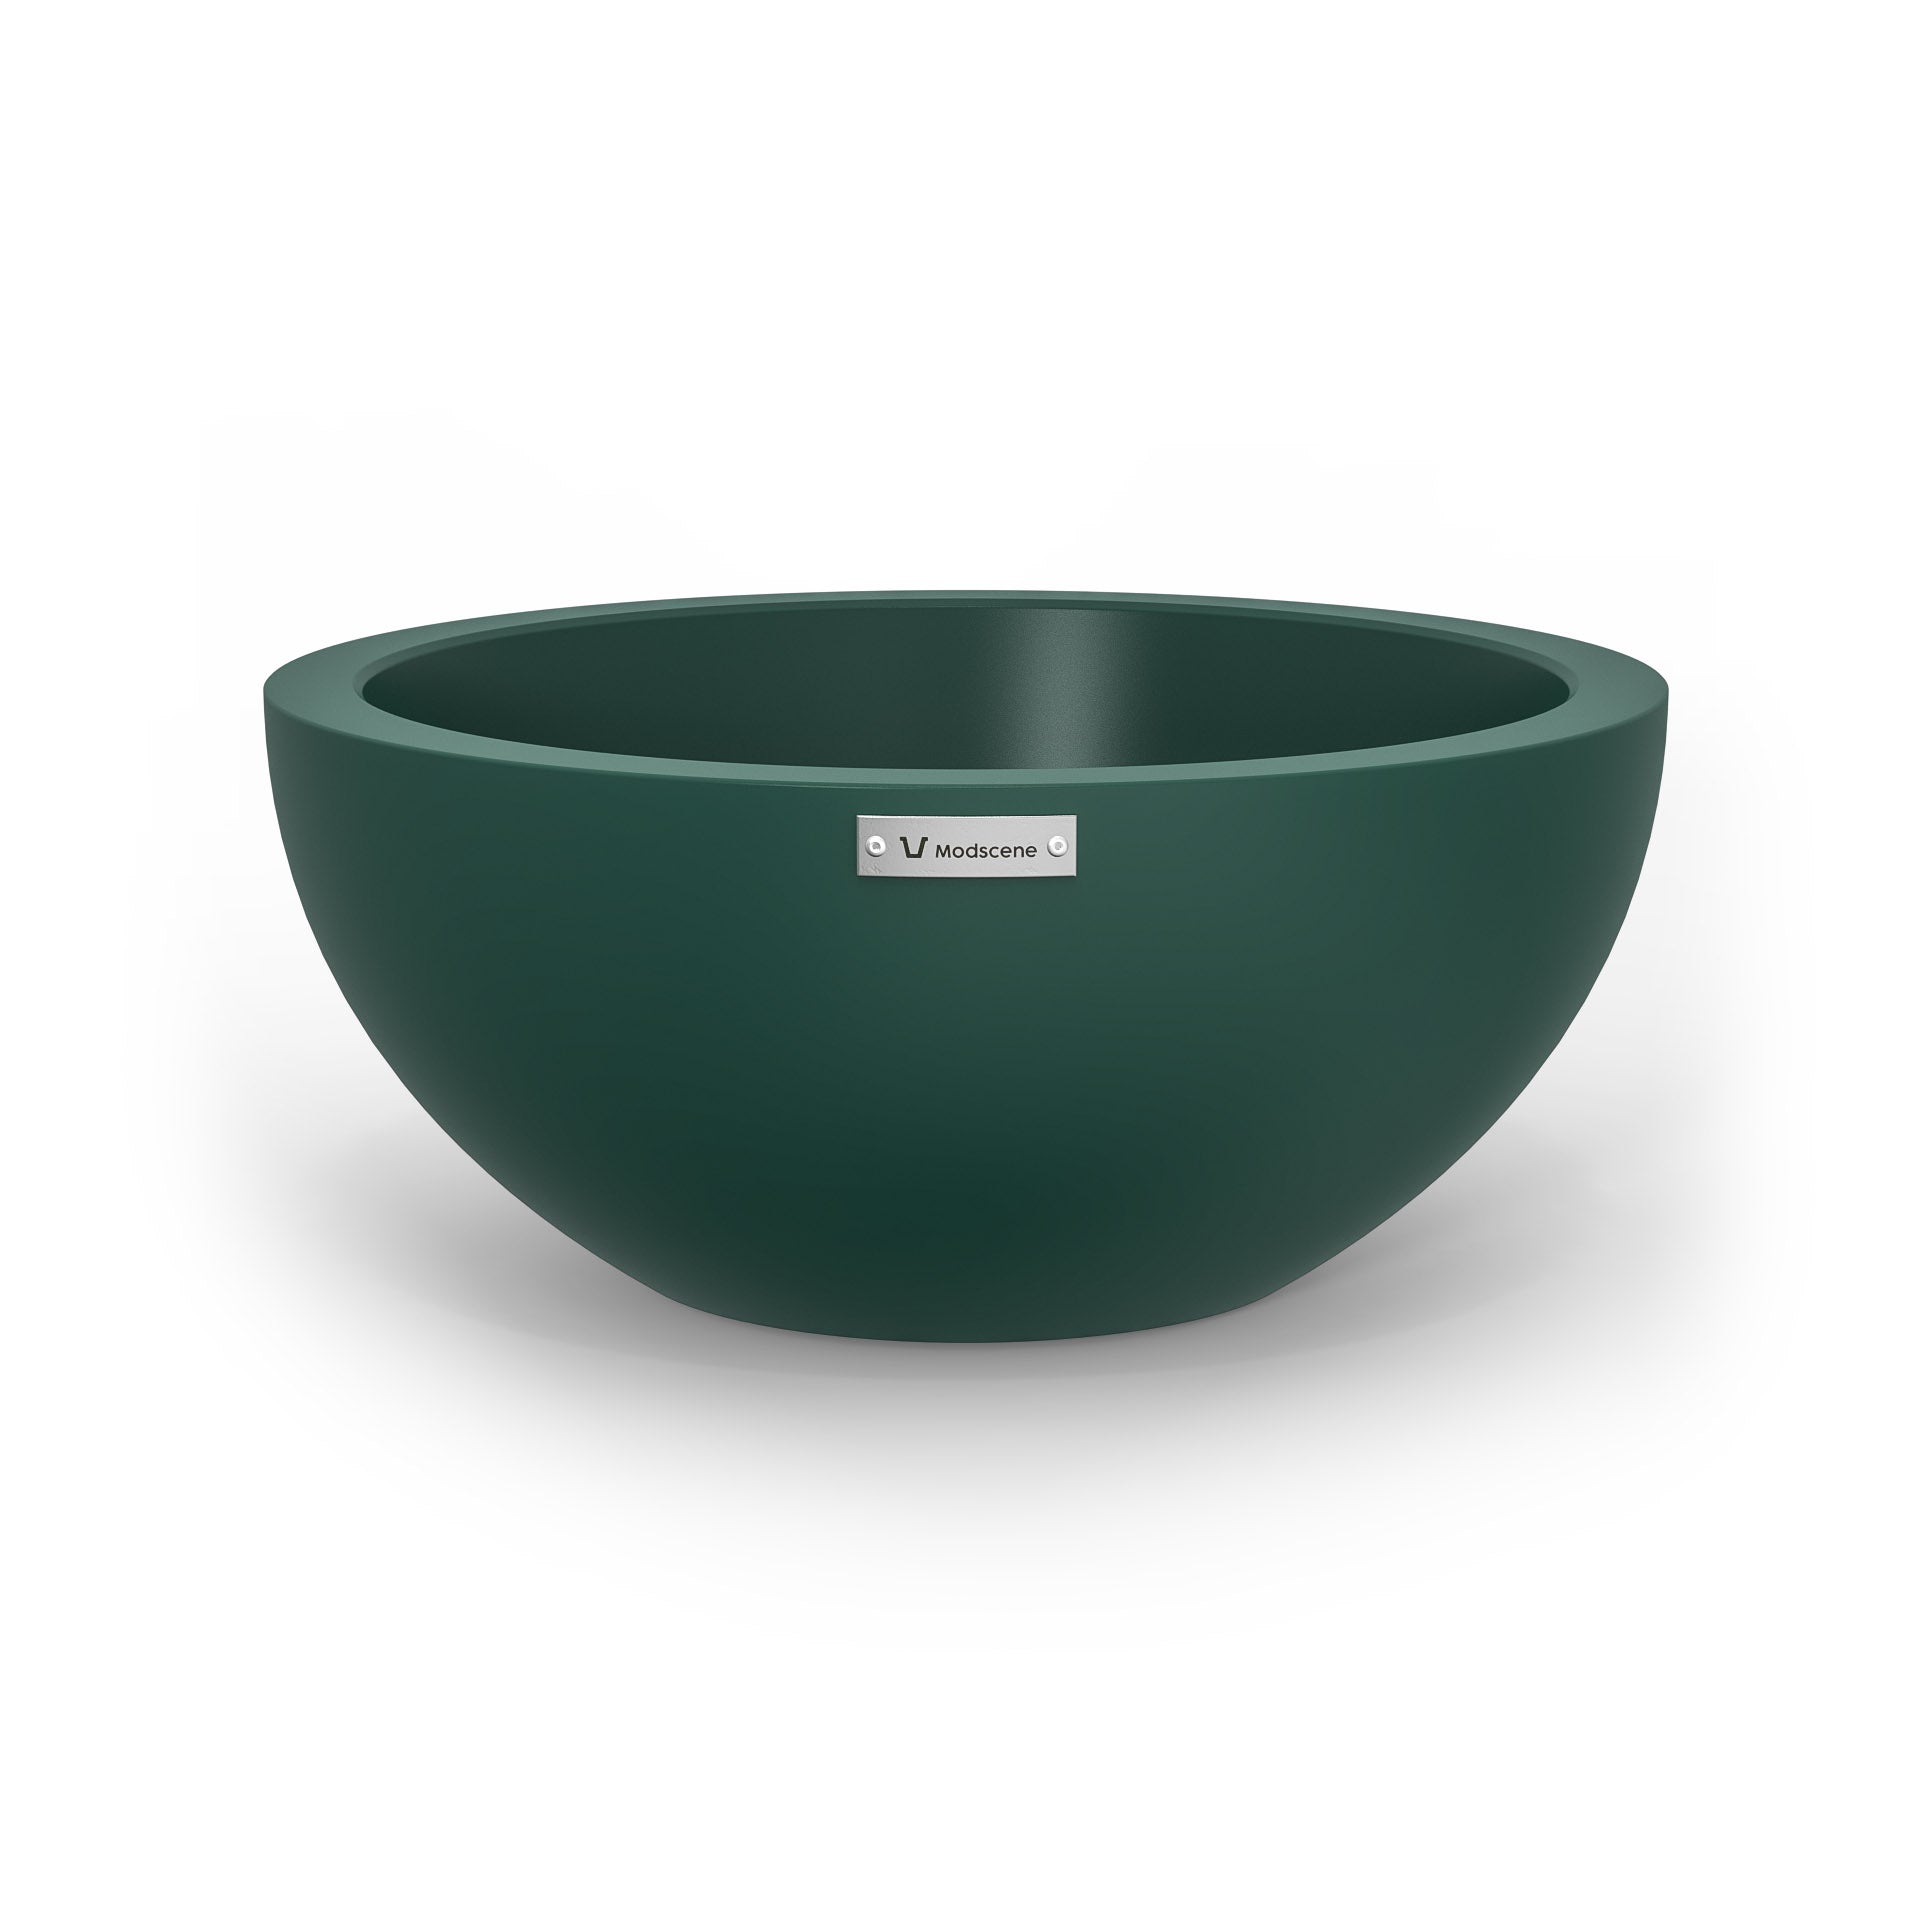 A small planter bowl in an emerald green colour made by Modscene. Australian planters.